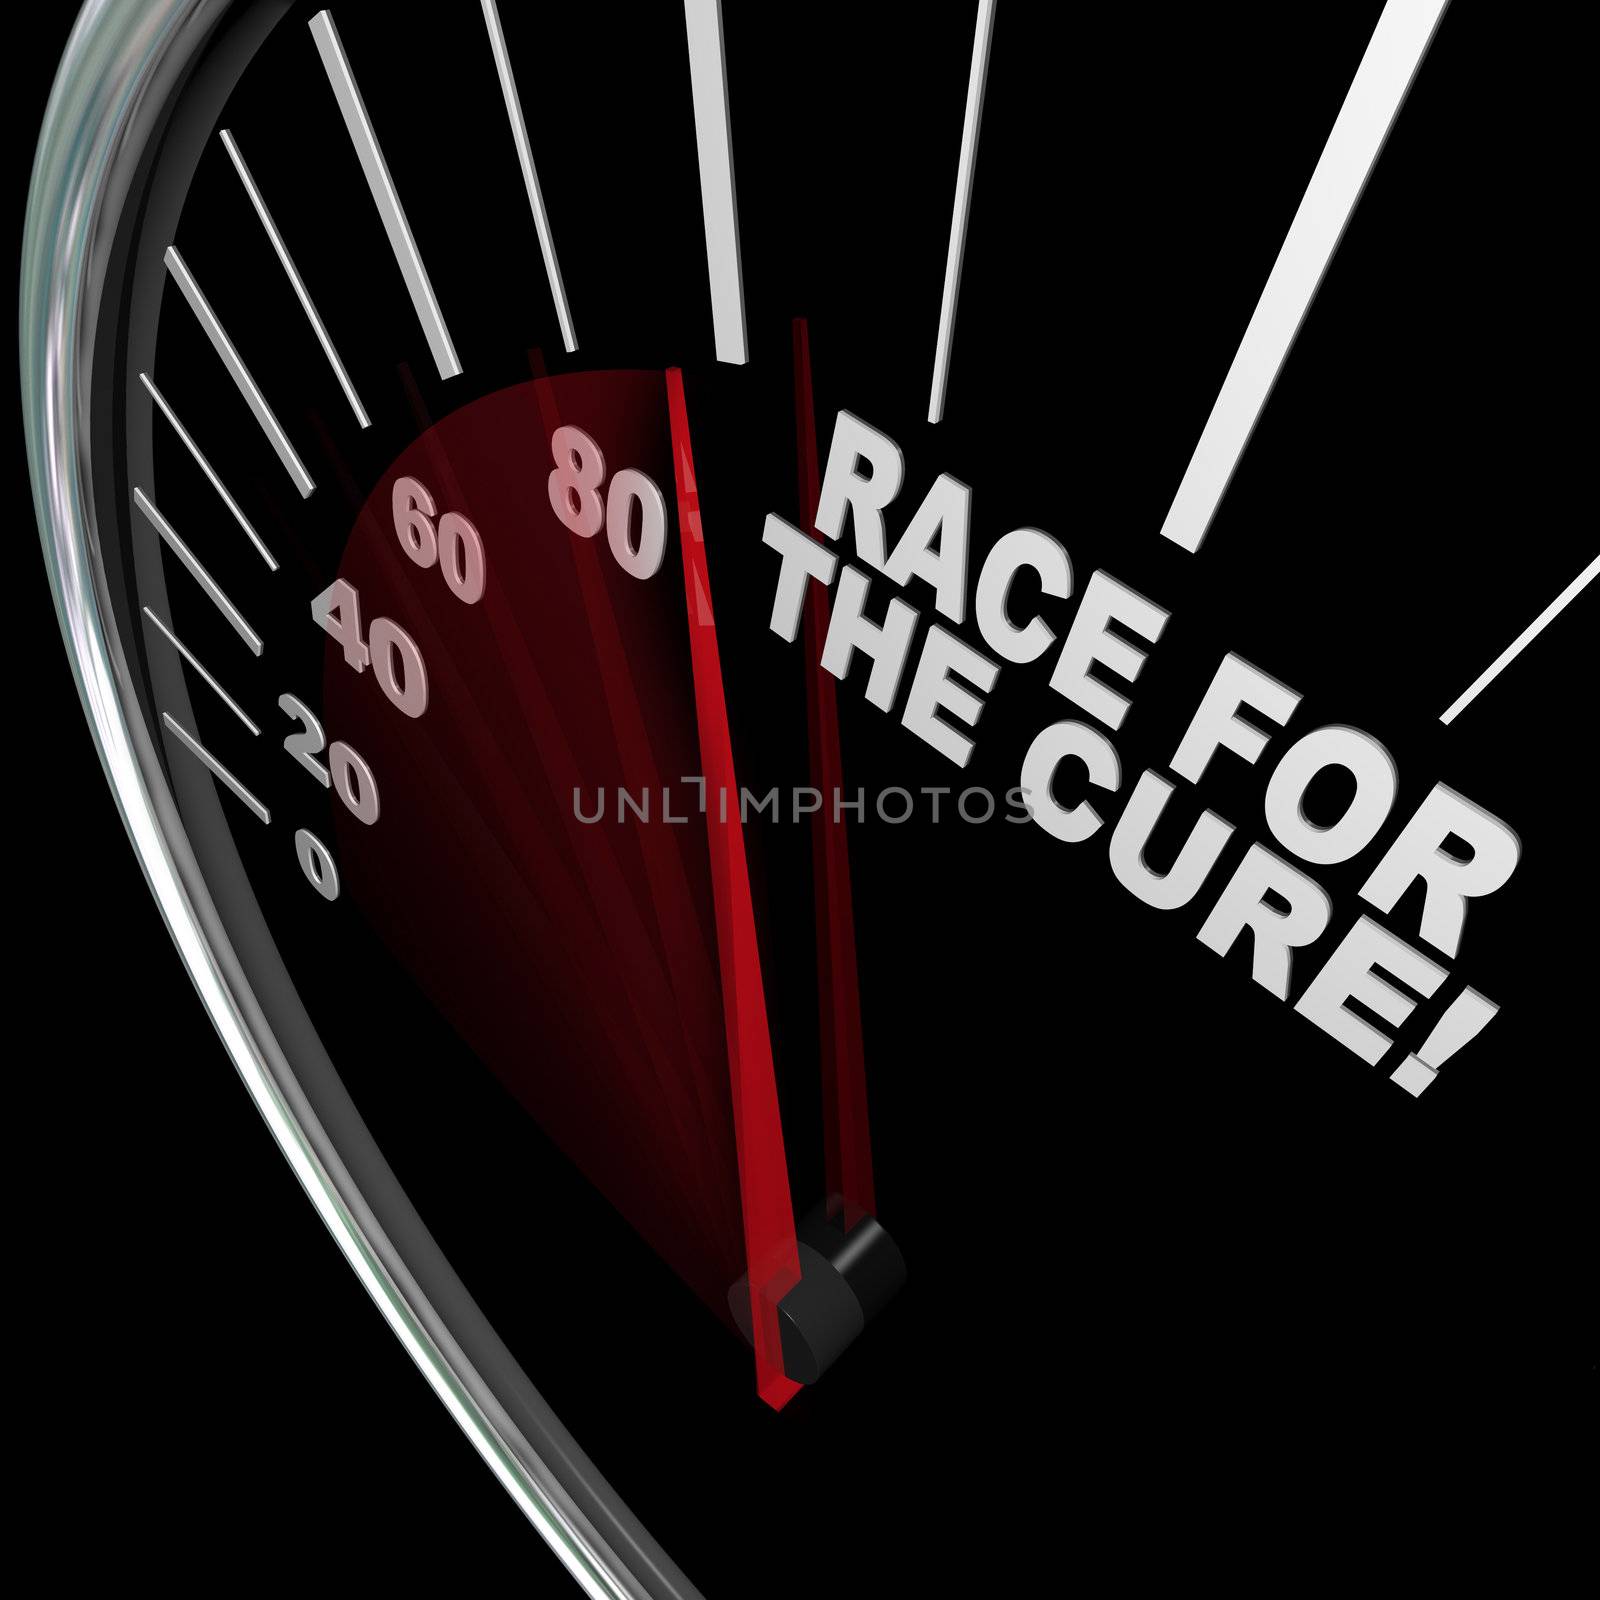 A black speedometer with white words Race for the Cure illustrating a fundrasier or charity walk or run to raise funds for medical research to fight an illness or disease such as cancer